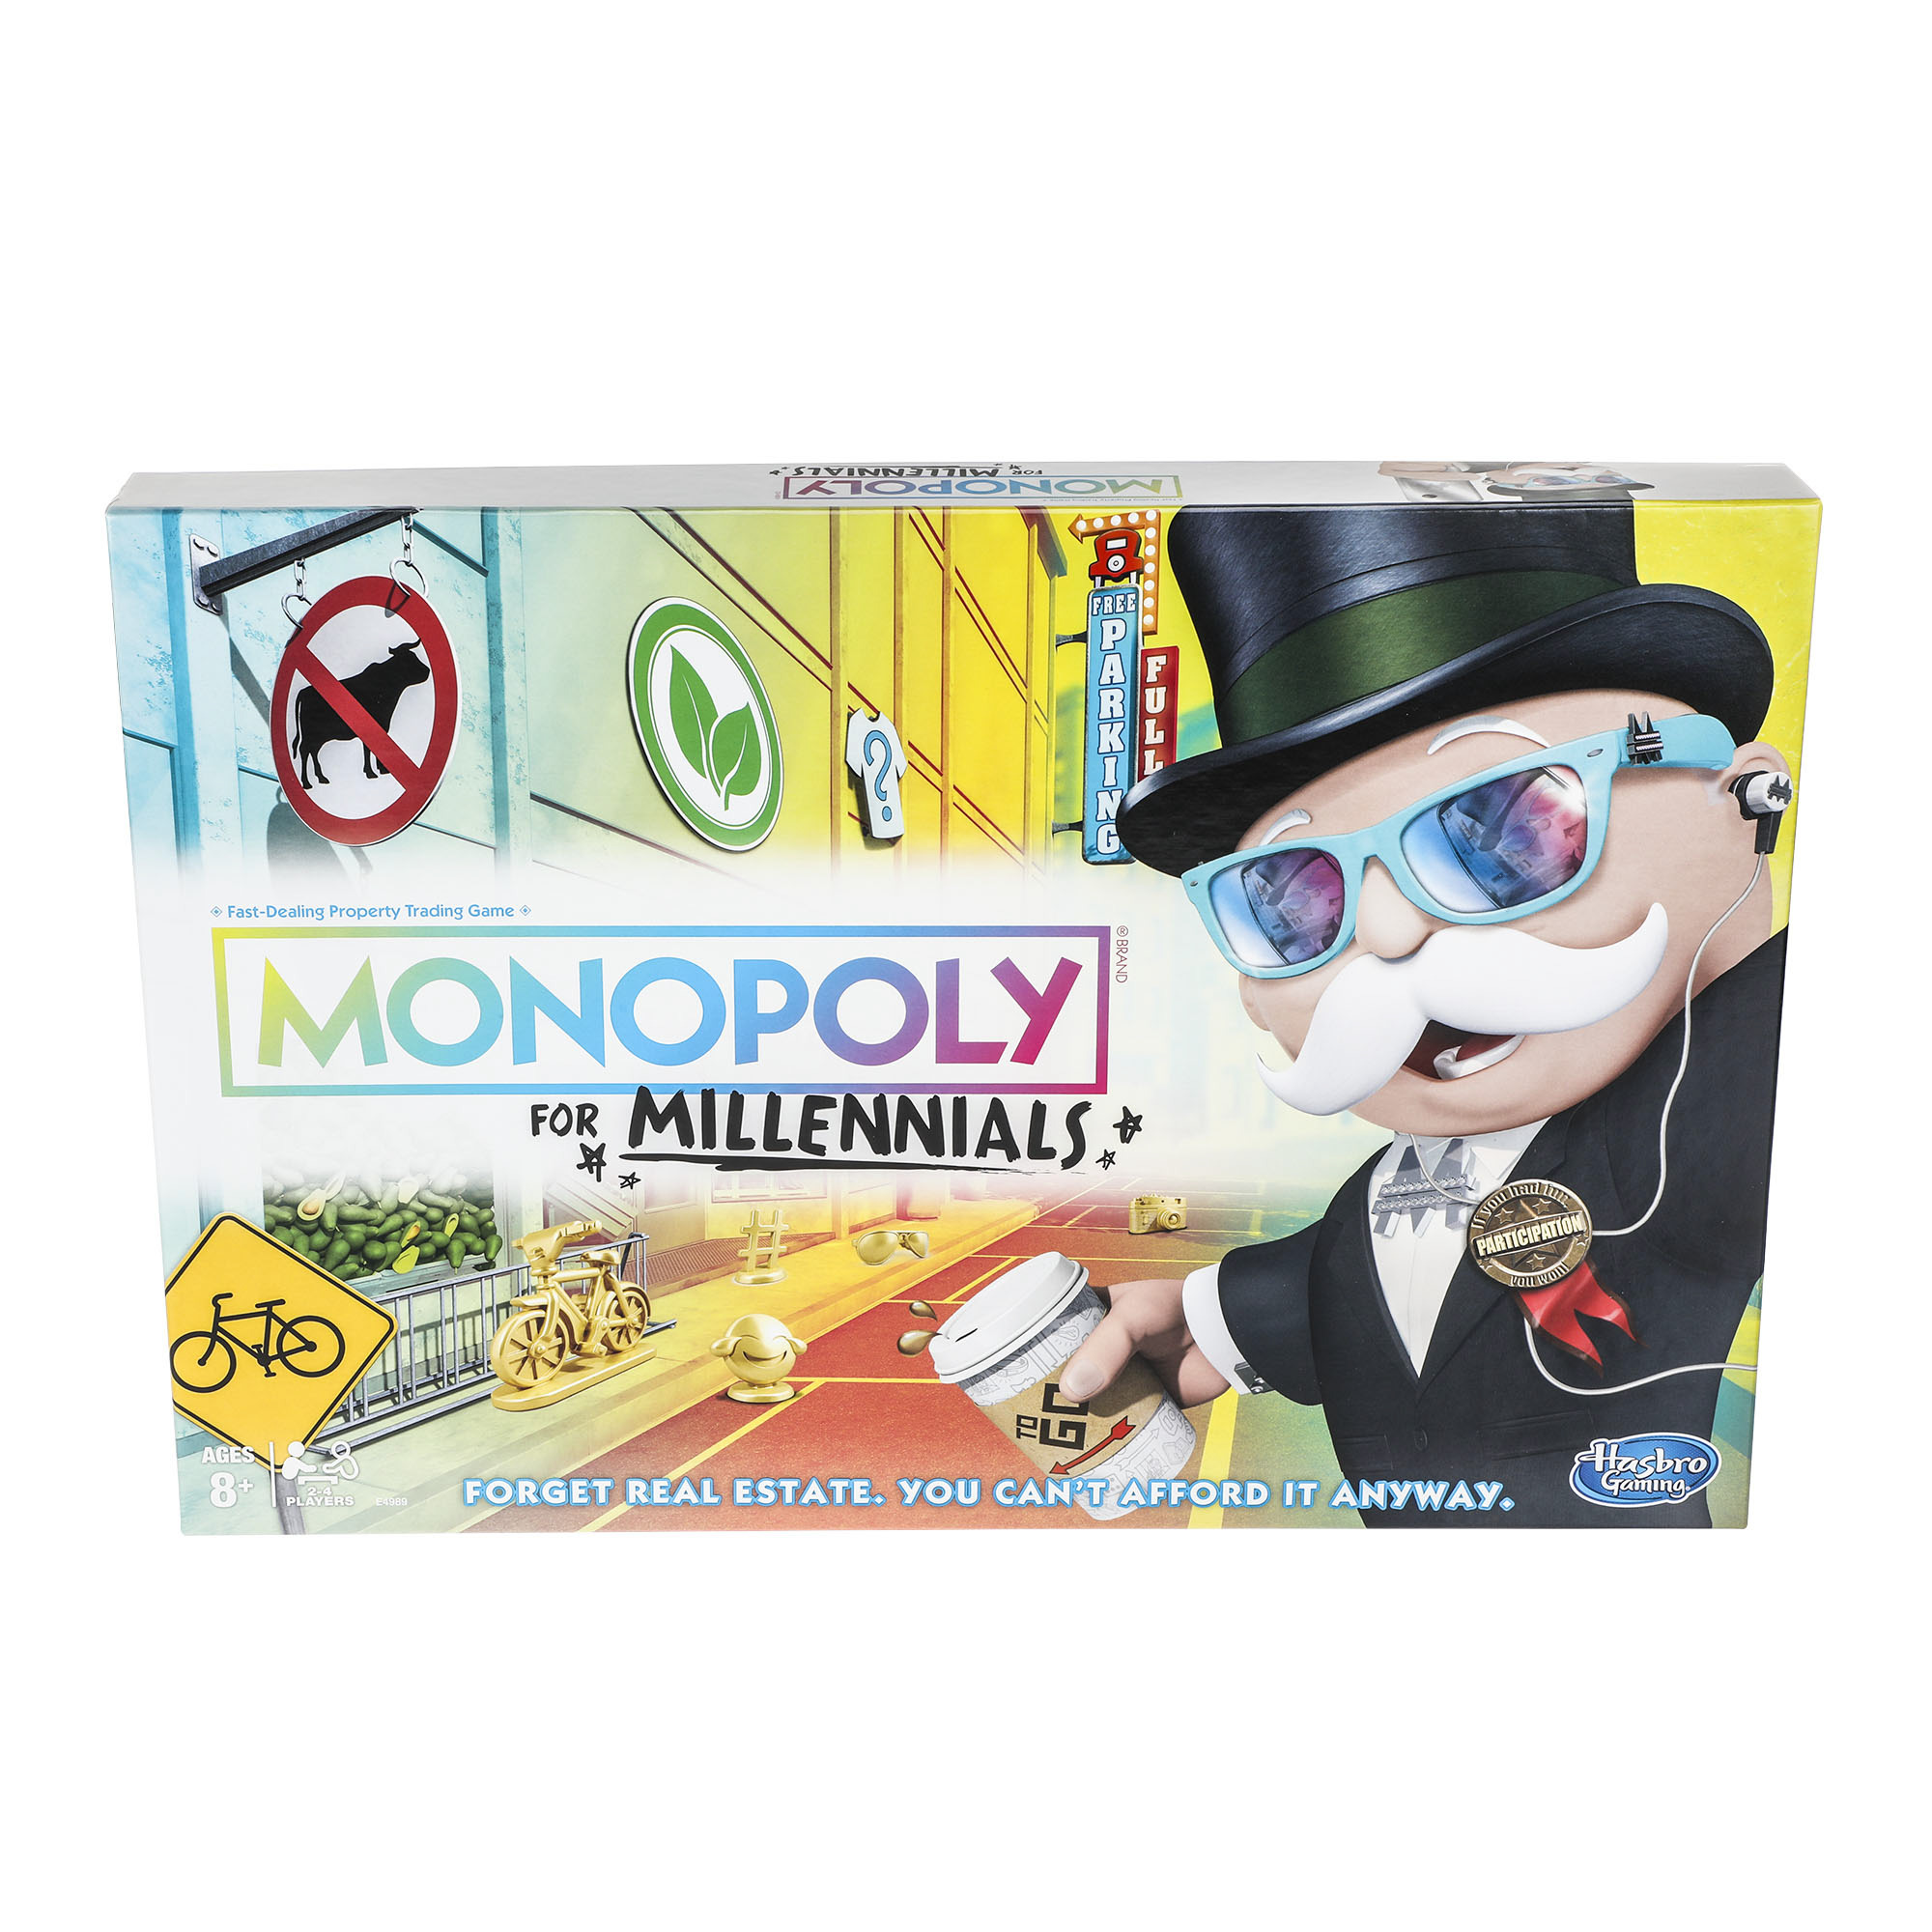 Monopoly for Millennials Board Game for Kids and Family Ages 8 and Up, 2-4 Players - image 1 of 5